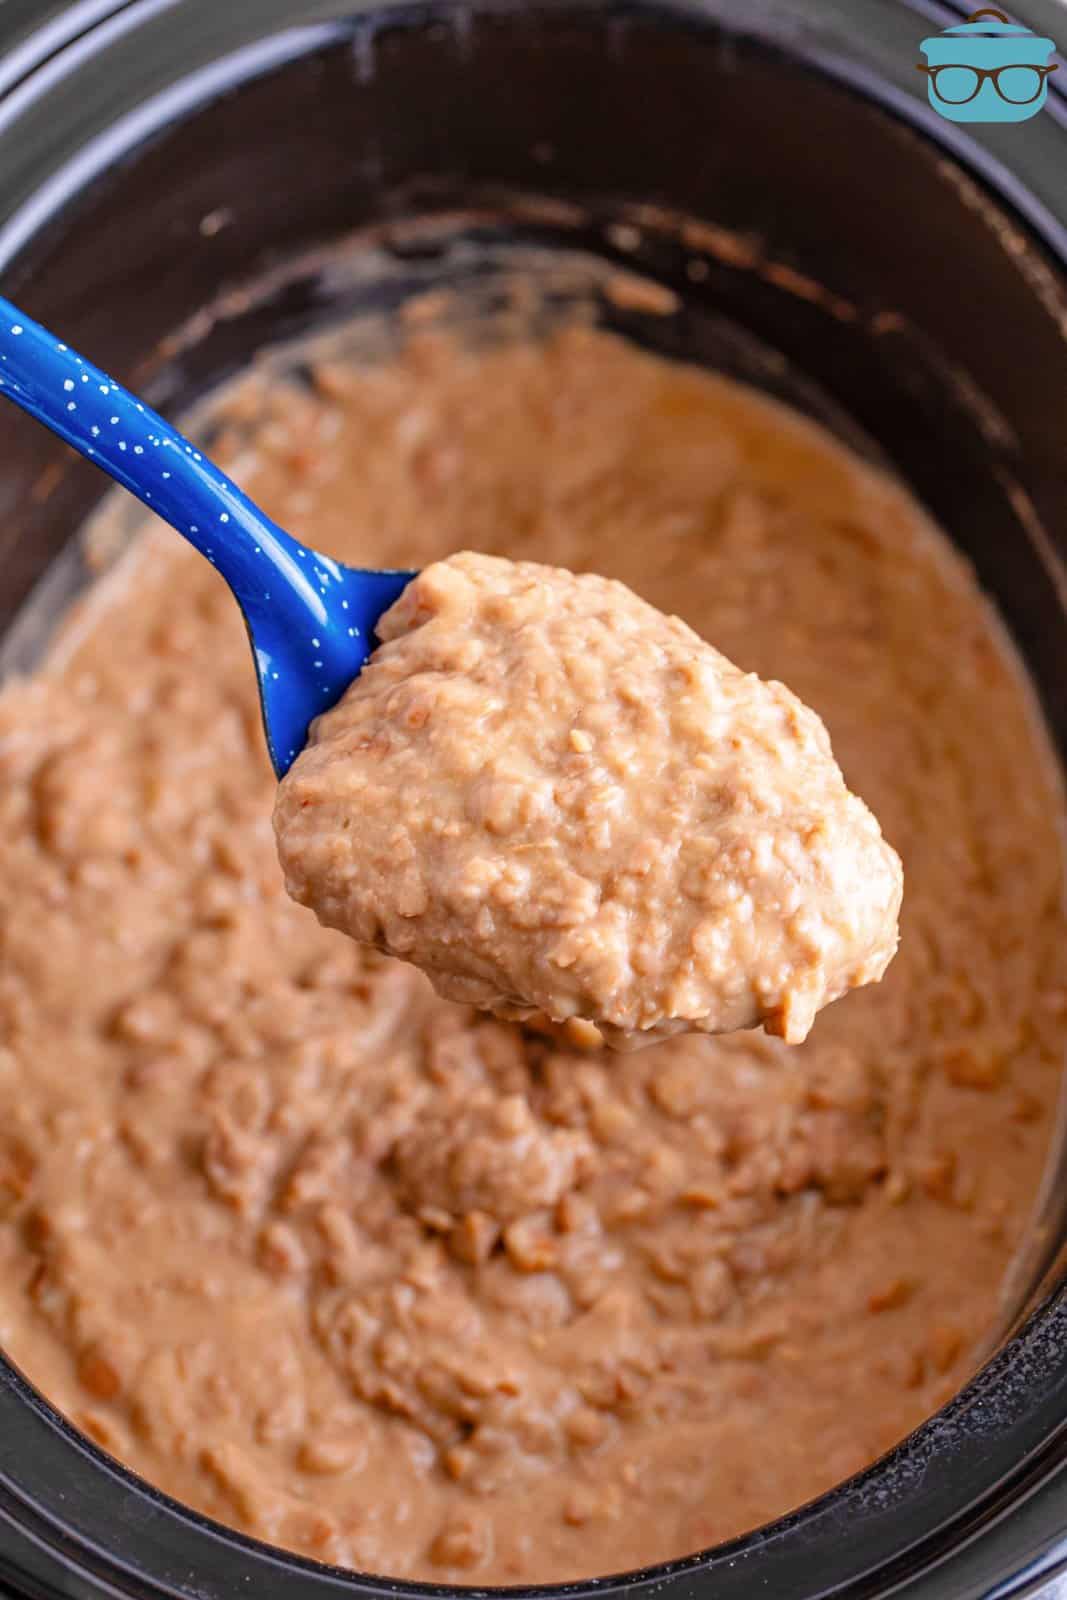 A serving spoon of refried beans above the Slow Cooker.